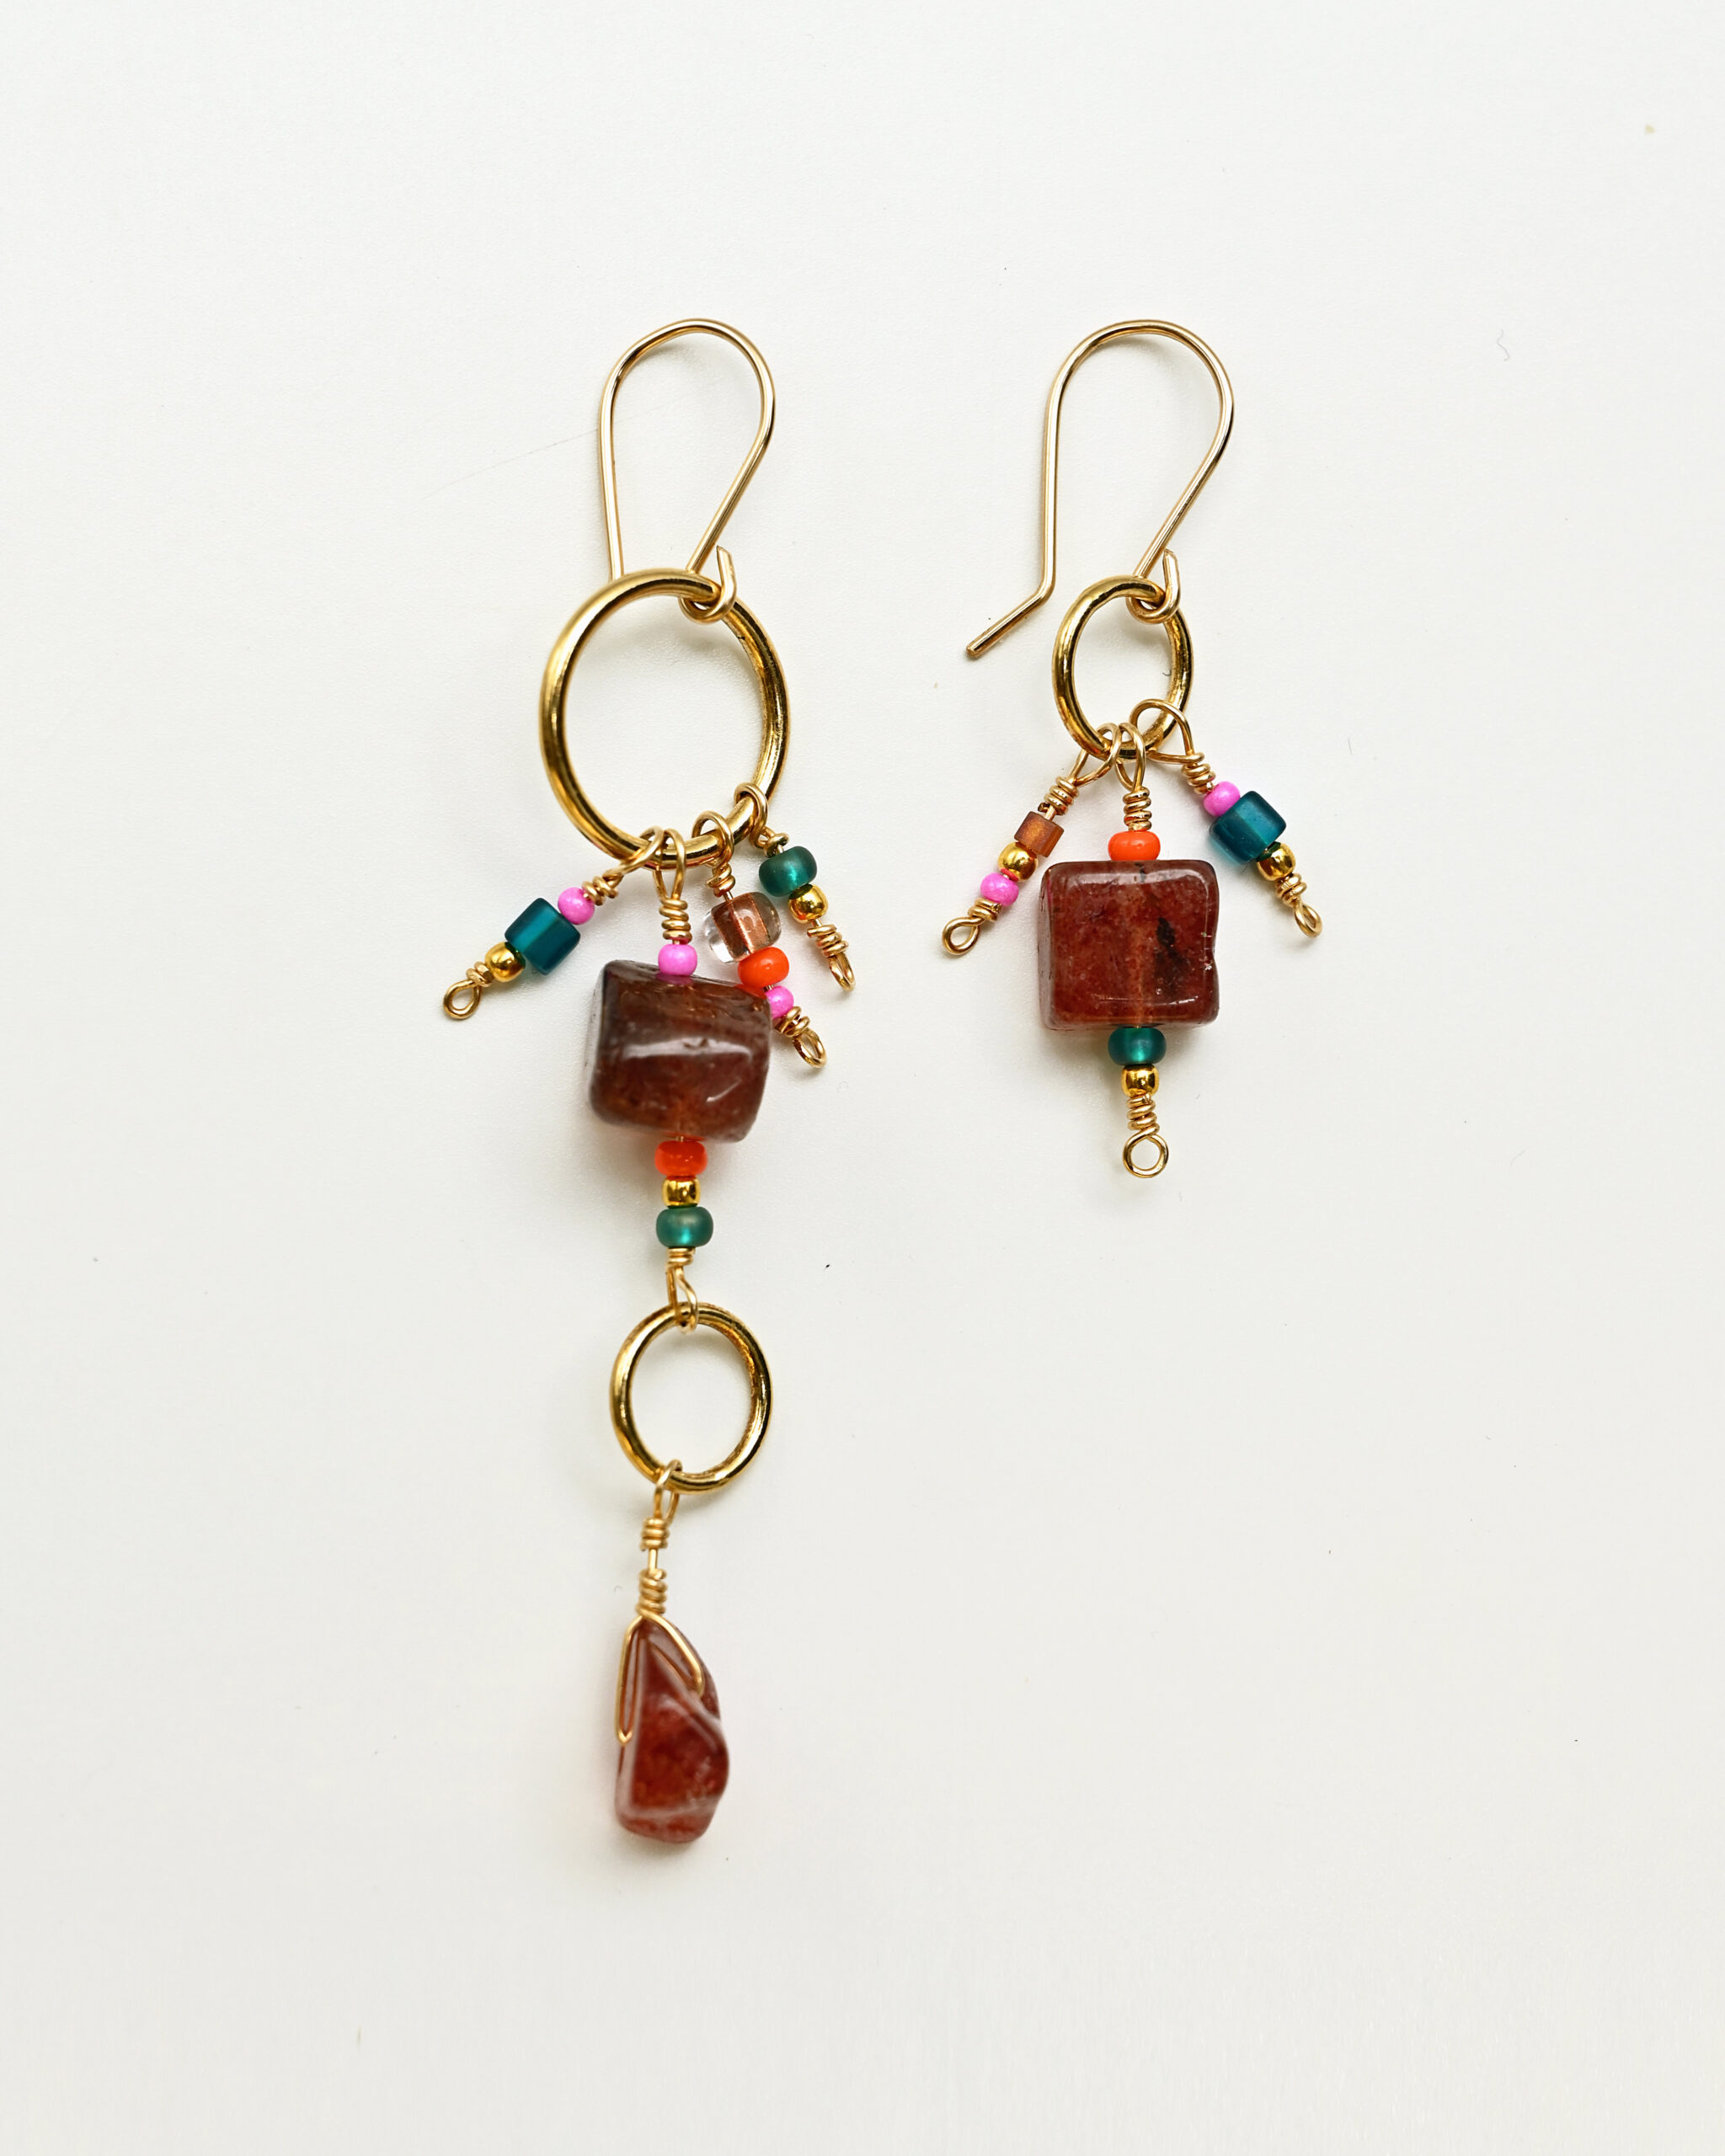 14k gold filled drop earrings with raspberry quartz gemstone, japanese beads and 18k gold plated sterling silver elements